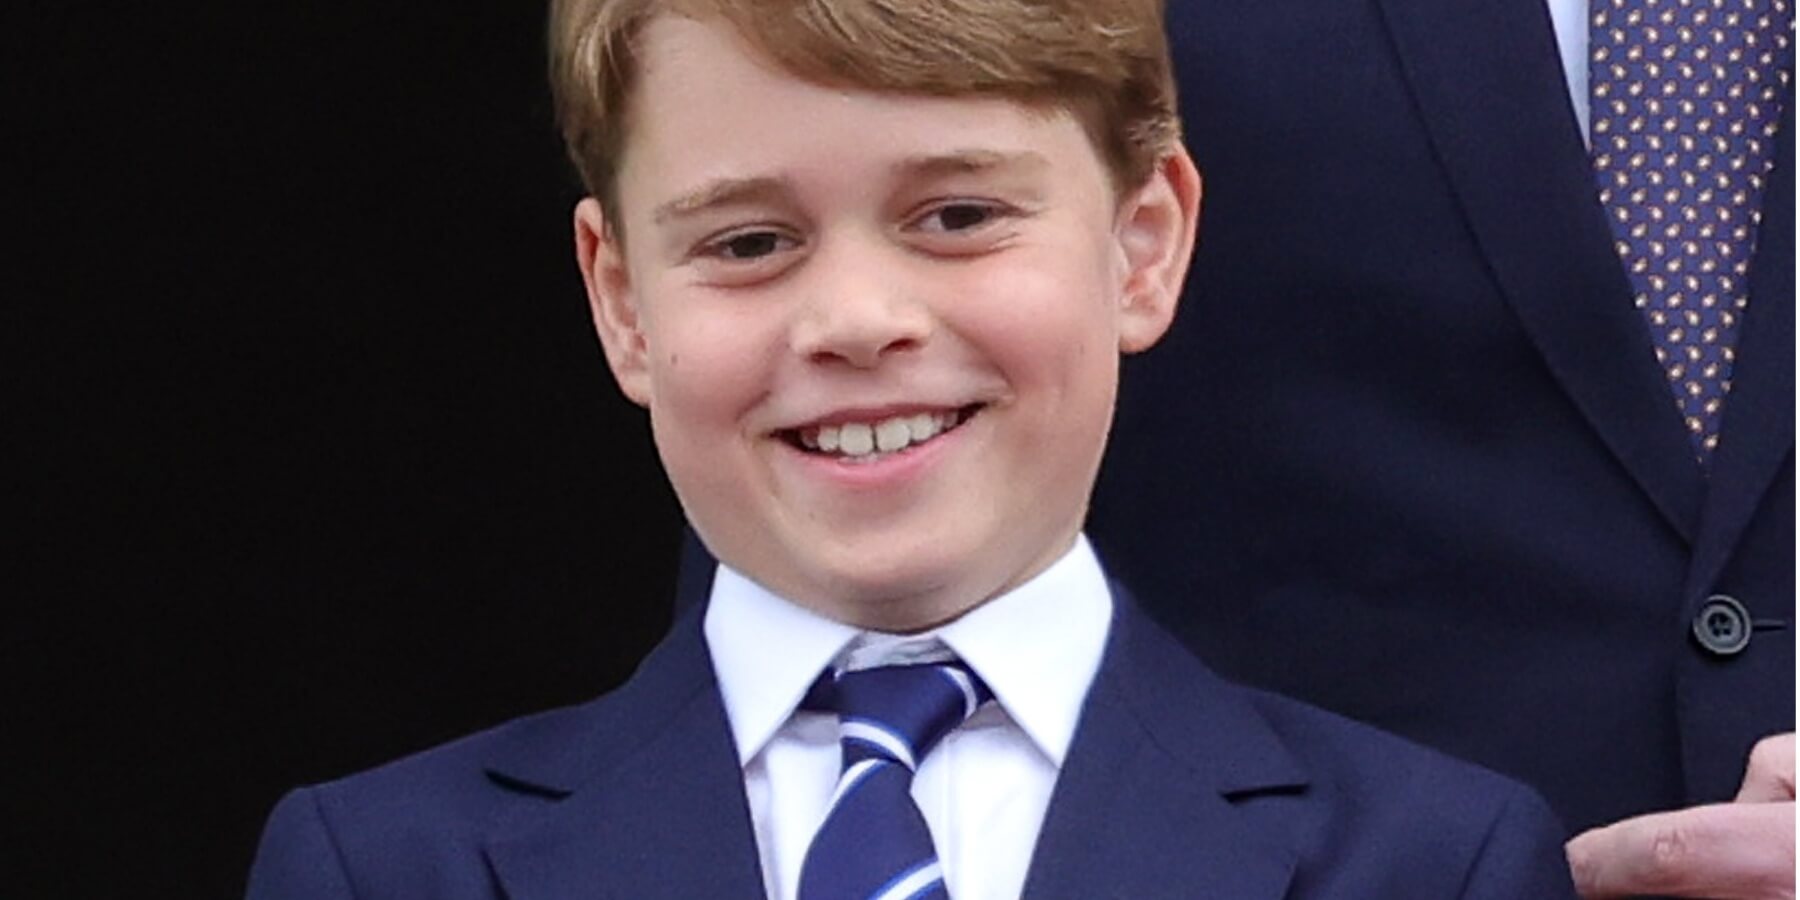 Prince George is set for a bigger royal role, but not until he is an adult